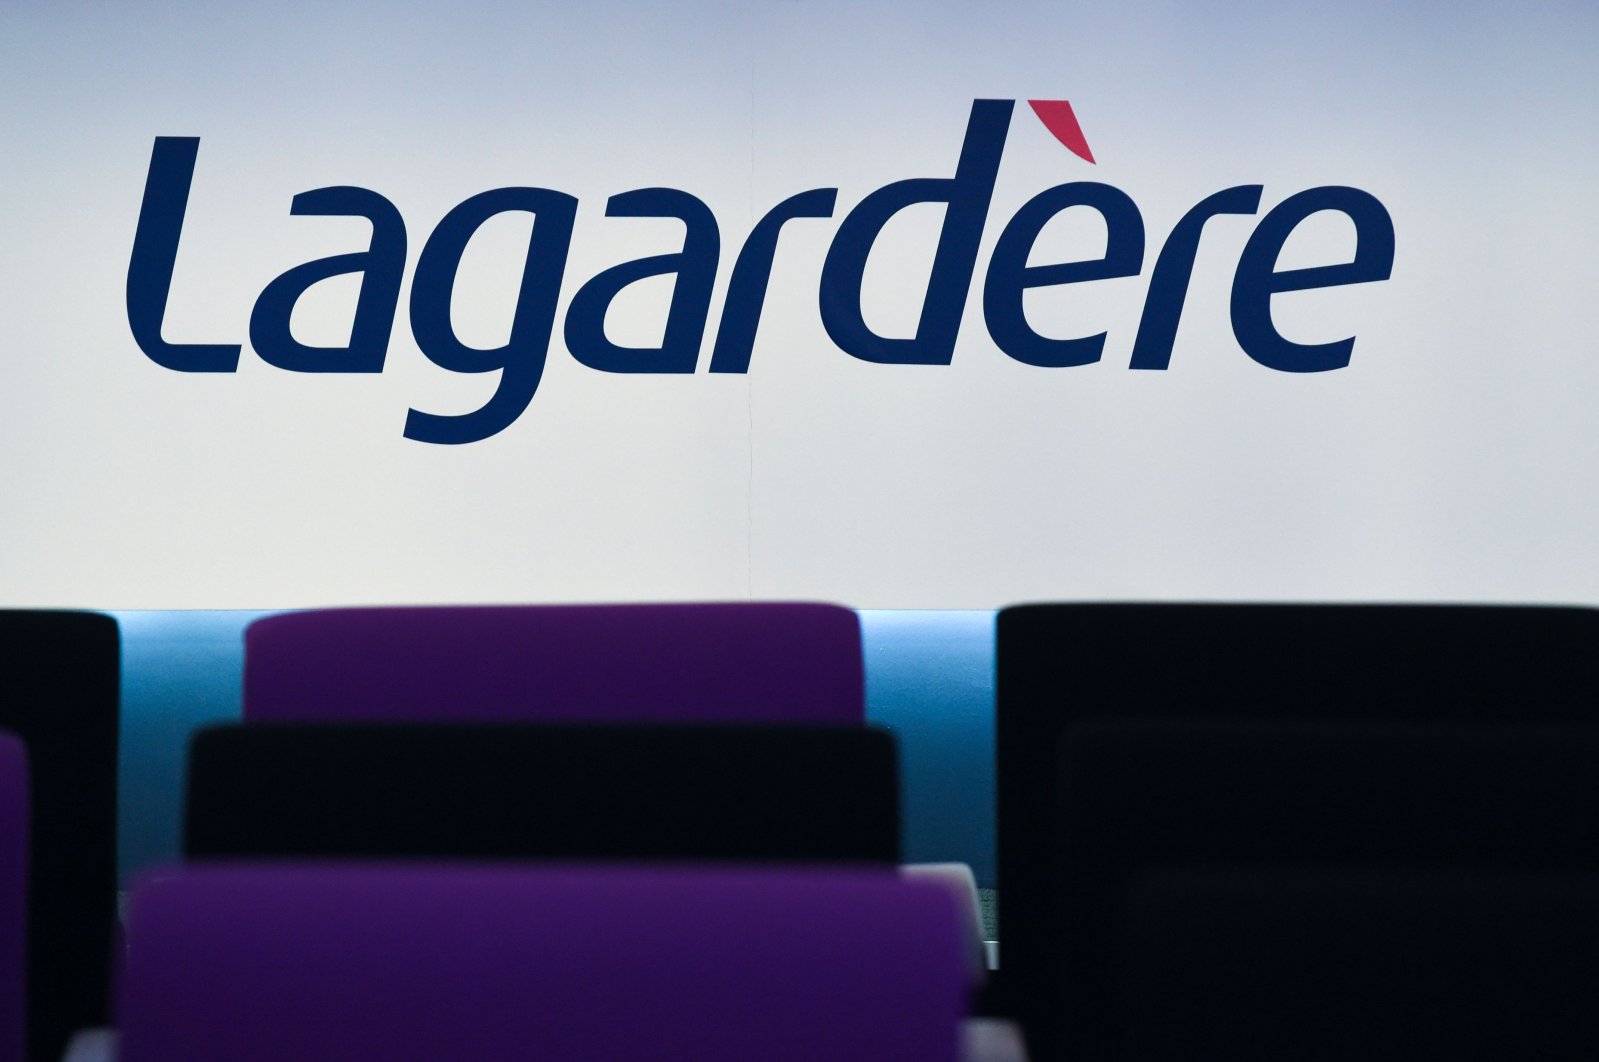 The logo of the French media group Lagardere taken during a press conference to present the group's 2018 results in Paris, March 13, 2019. (AFP Photo)